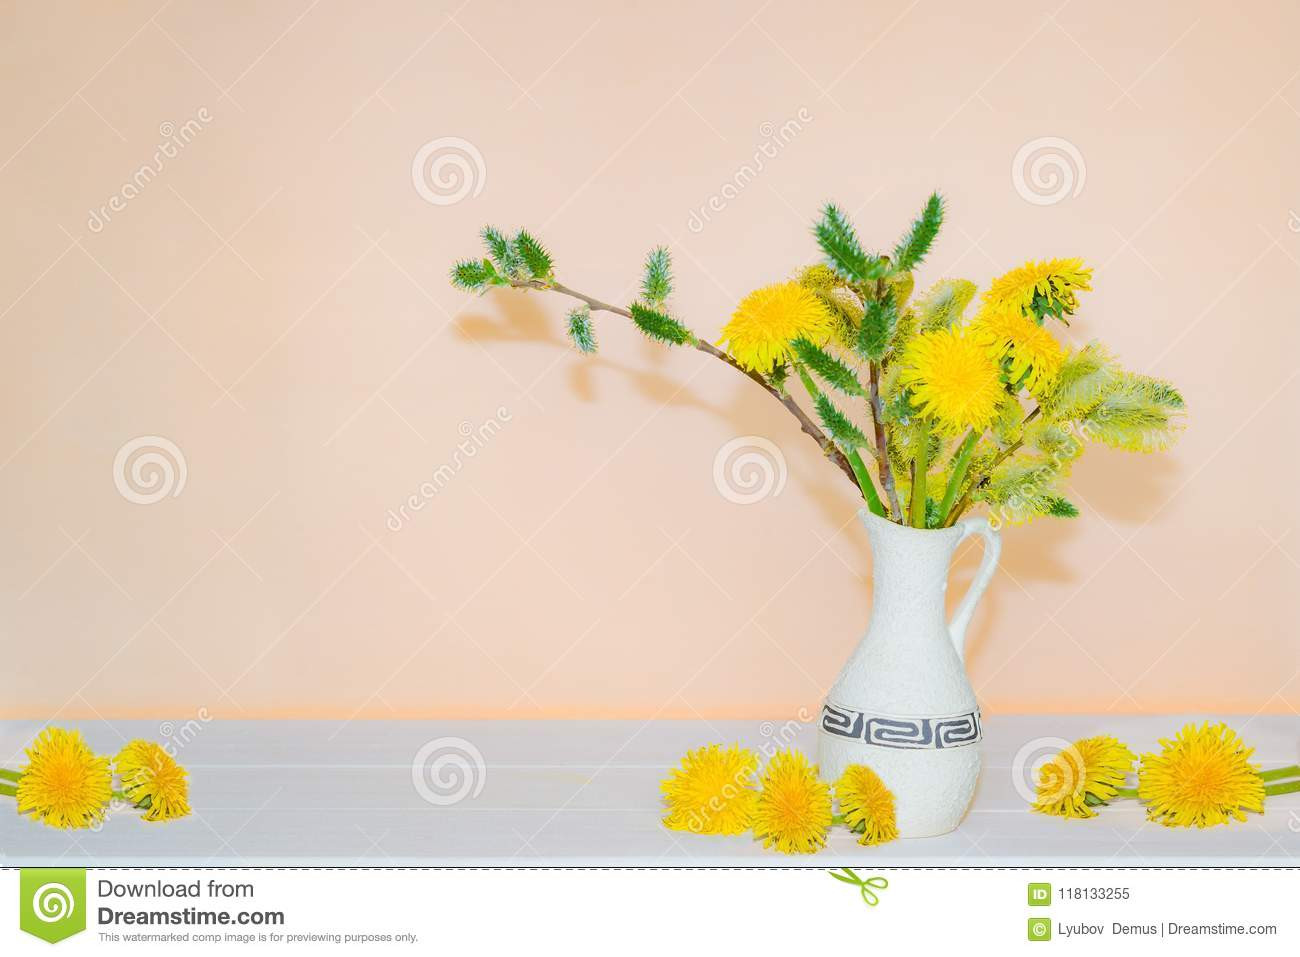 21 Stylish Light Up Branches for Vase 2024 free download light up branches for vase of bouquet of spring willow branches with dandelion flowers in a vase for bouquet of spring willow branches with dandelion flowers in a vase on a festive backgroun